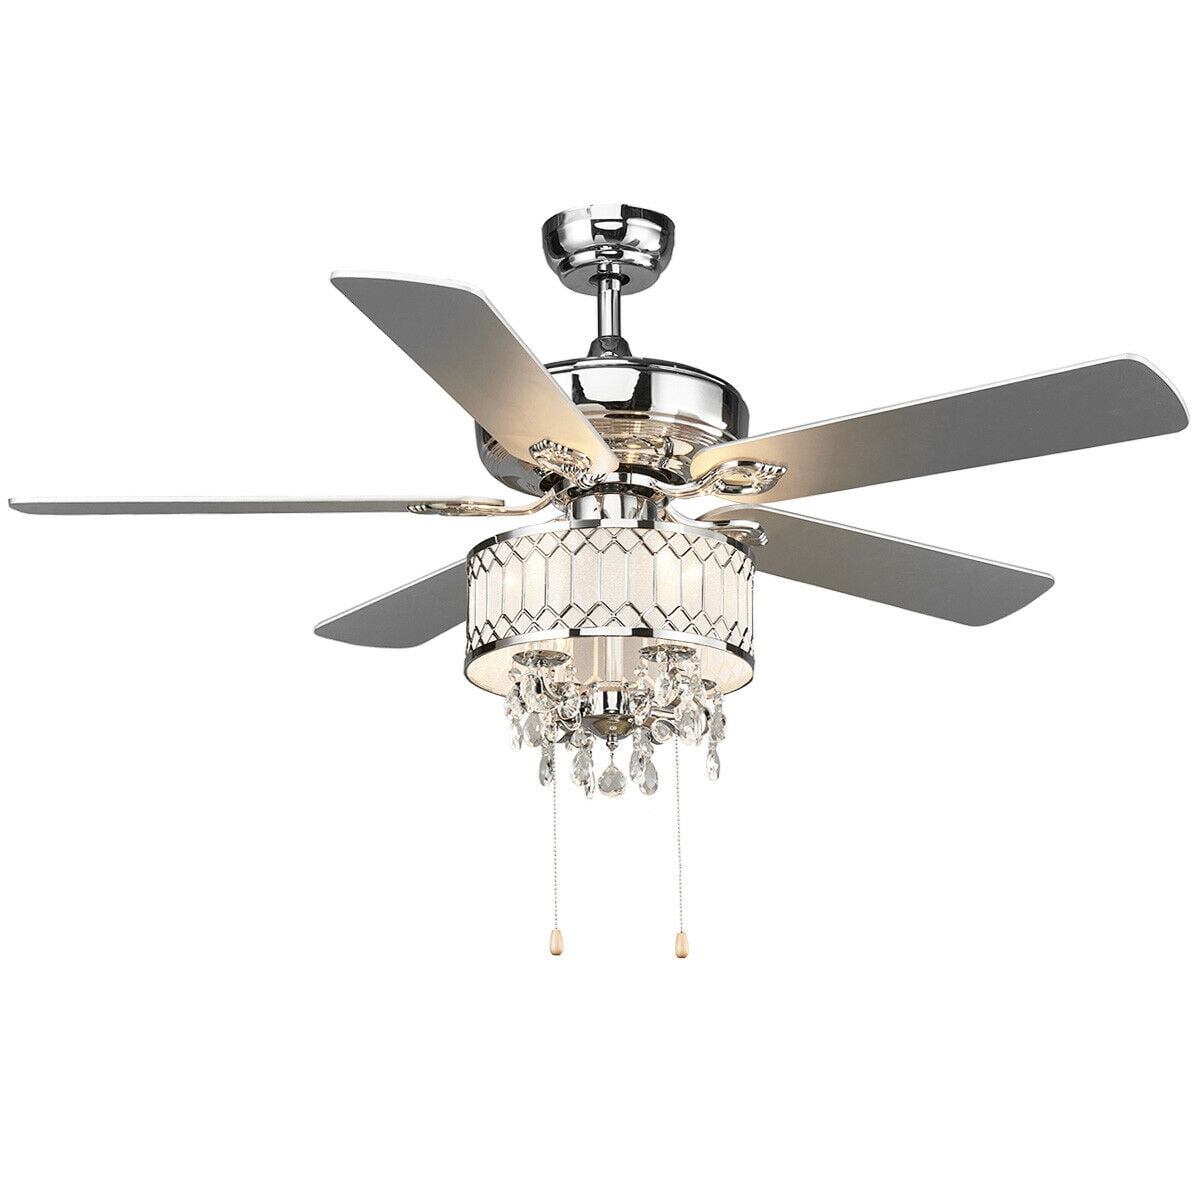 5 Wooden Reversible Blades Black Tangkula Vintage Ceiling Fan 52-Inch for Indoor Classical Fan with 3 Lights 3 Speed Ceiling Fan with Pull Chain & Mute Motor LED Ceiling Fan 